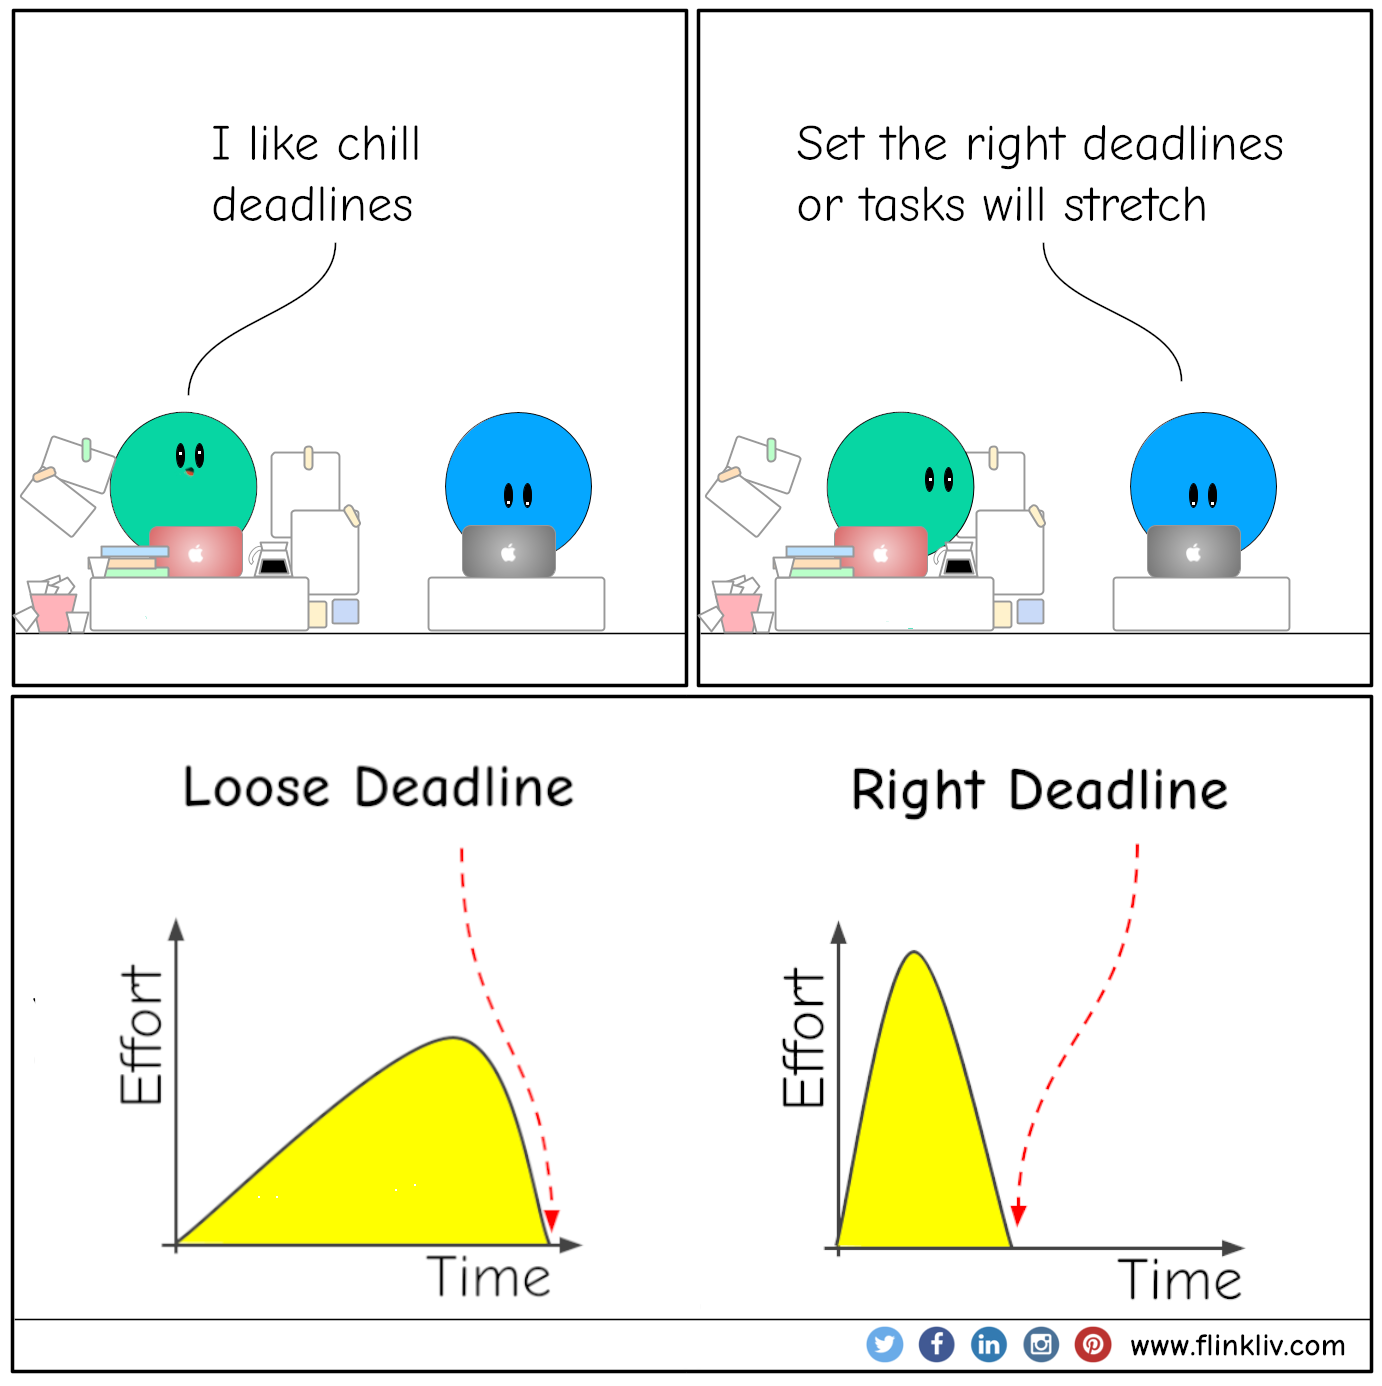  Conversation between A and B about to set the right deadlineas to complete a task
				A: I like chill deadlines.
				B: Set the right deadlines, or tasks'll stretch. 
              